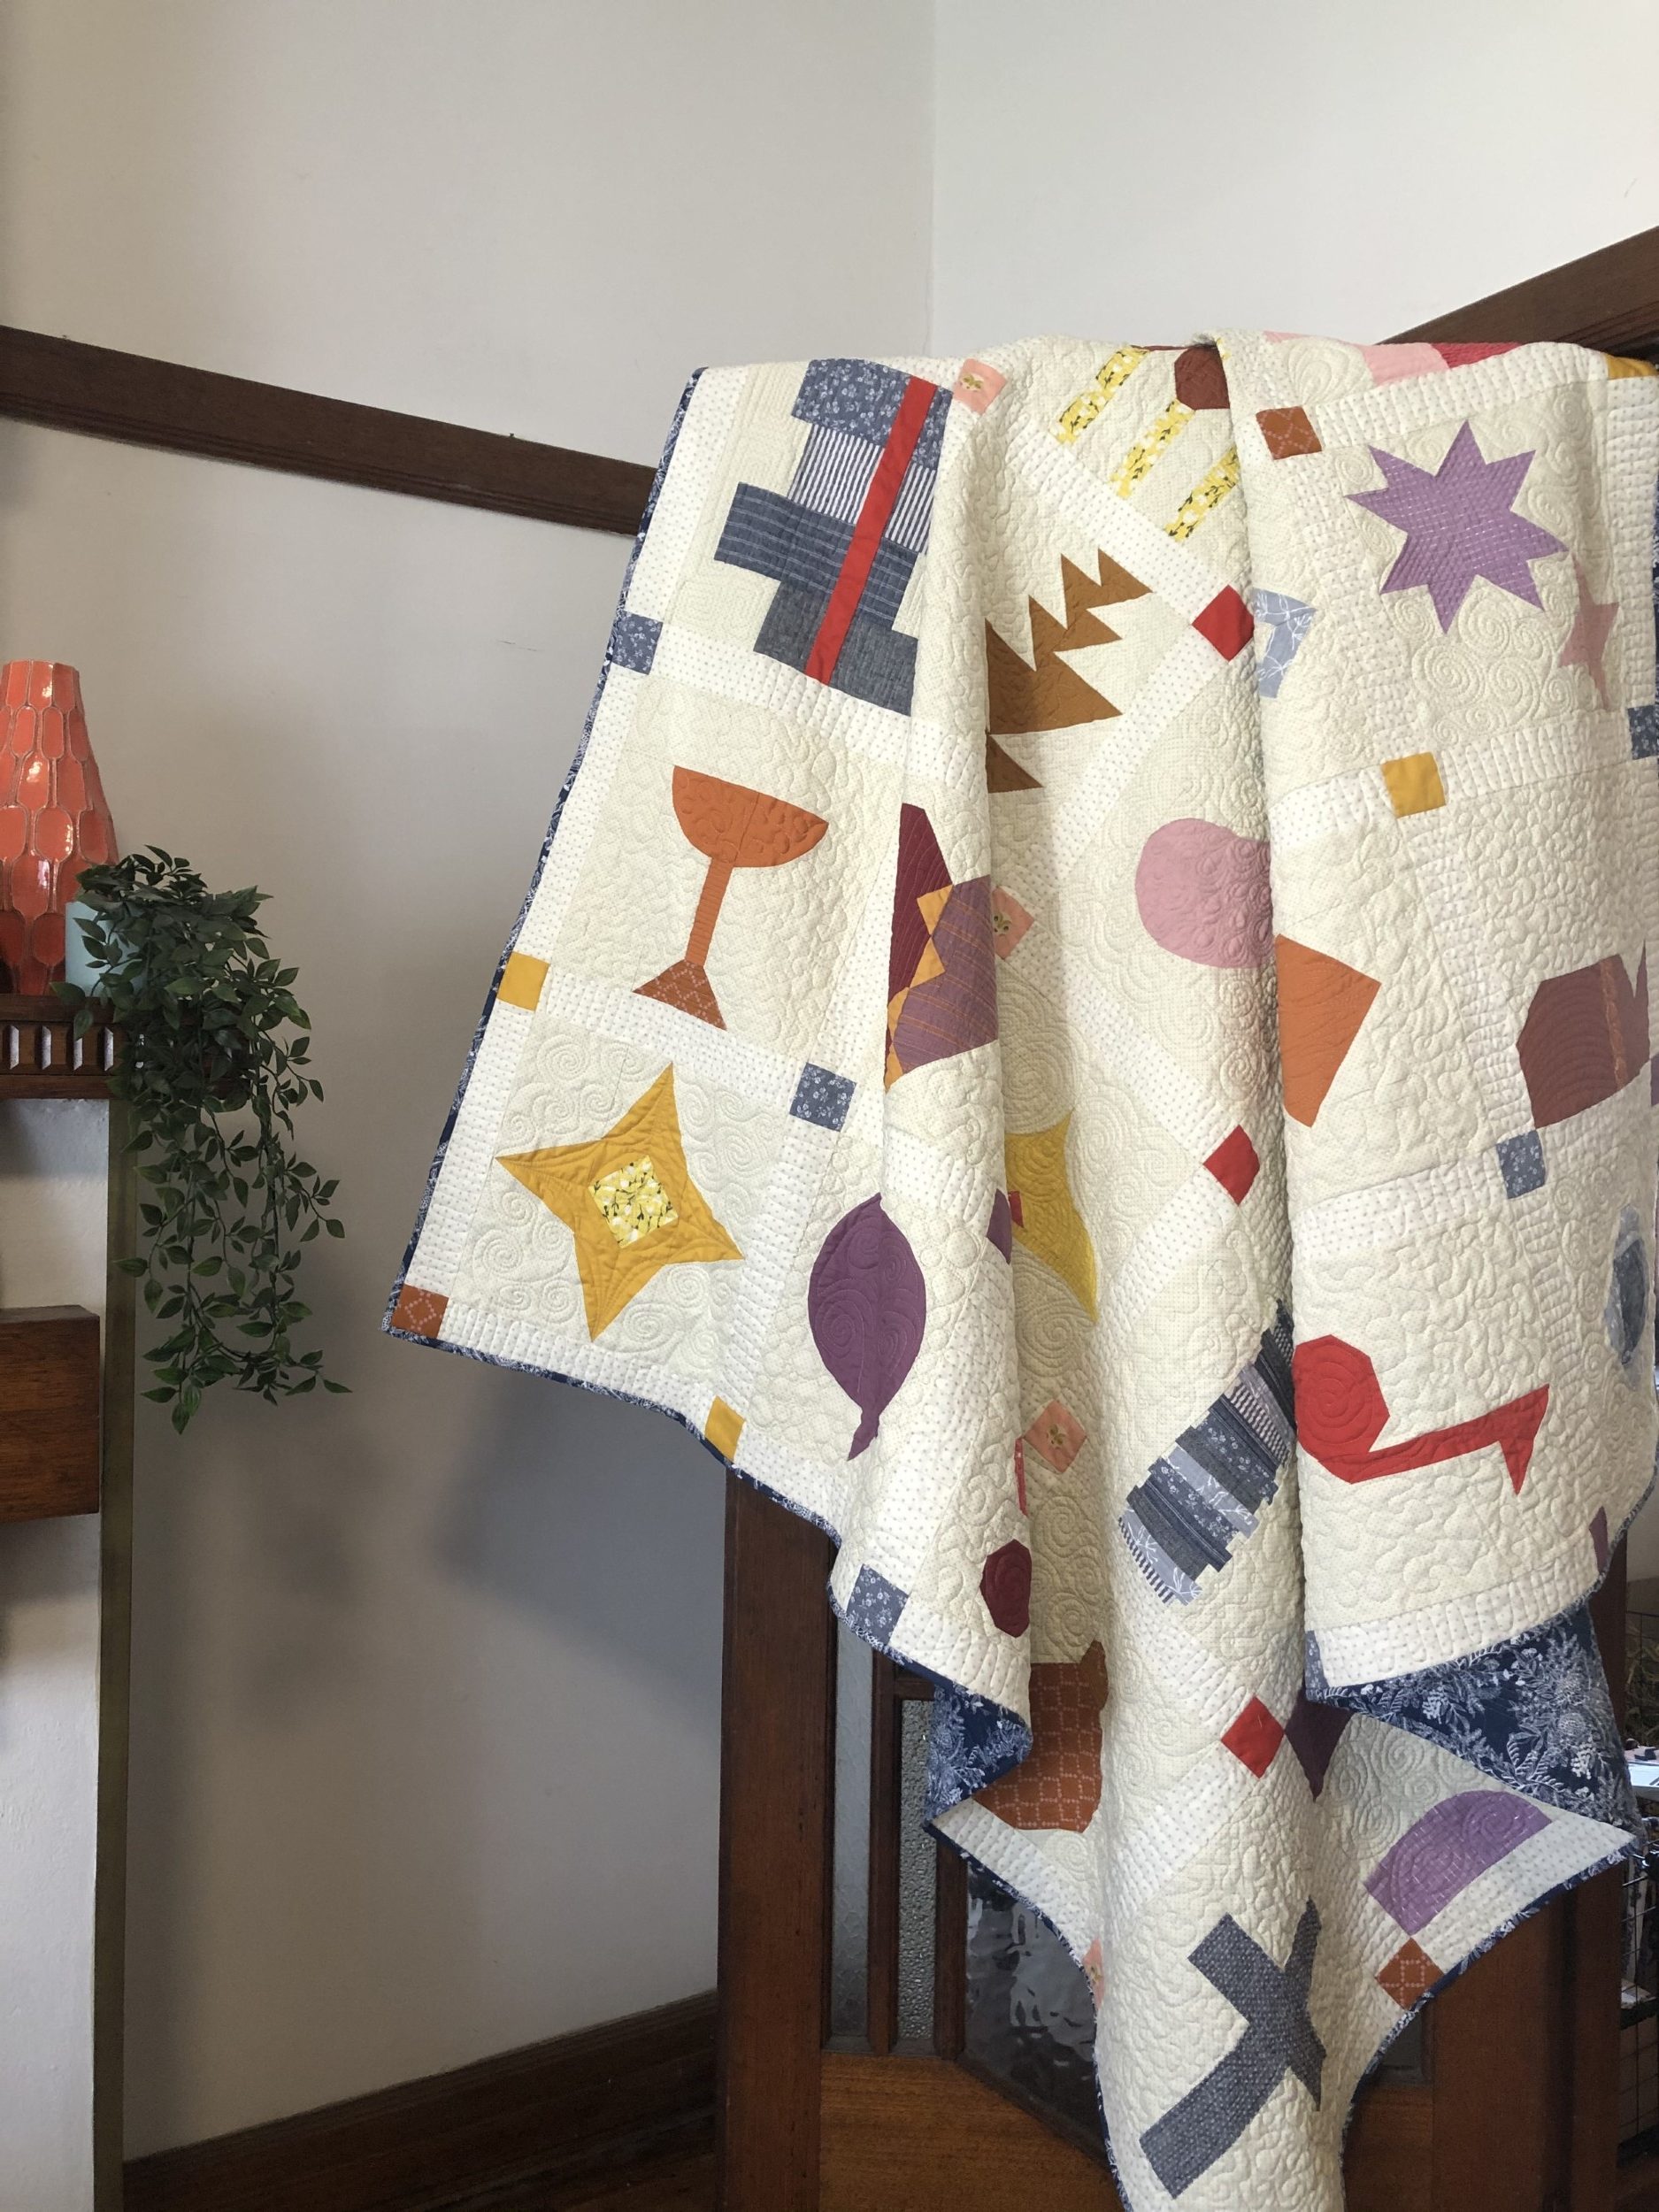 NEW! Welcome Baby - Quilt PATTERN - by Phoebe Moon Designs